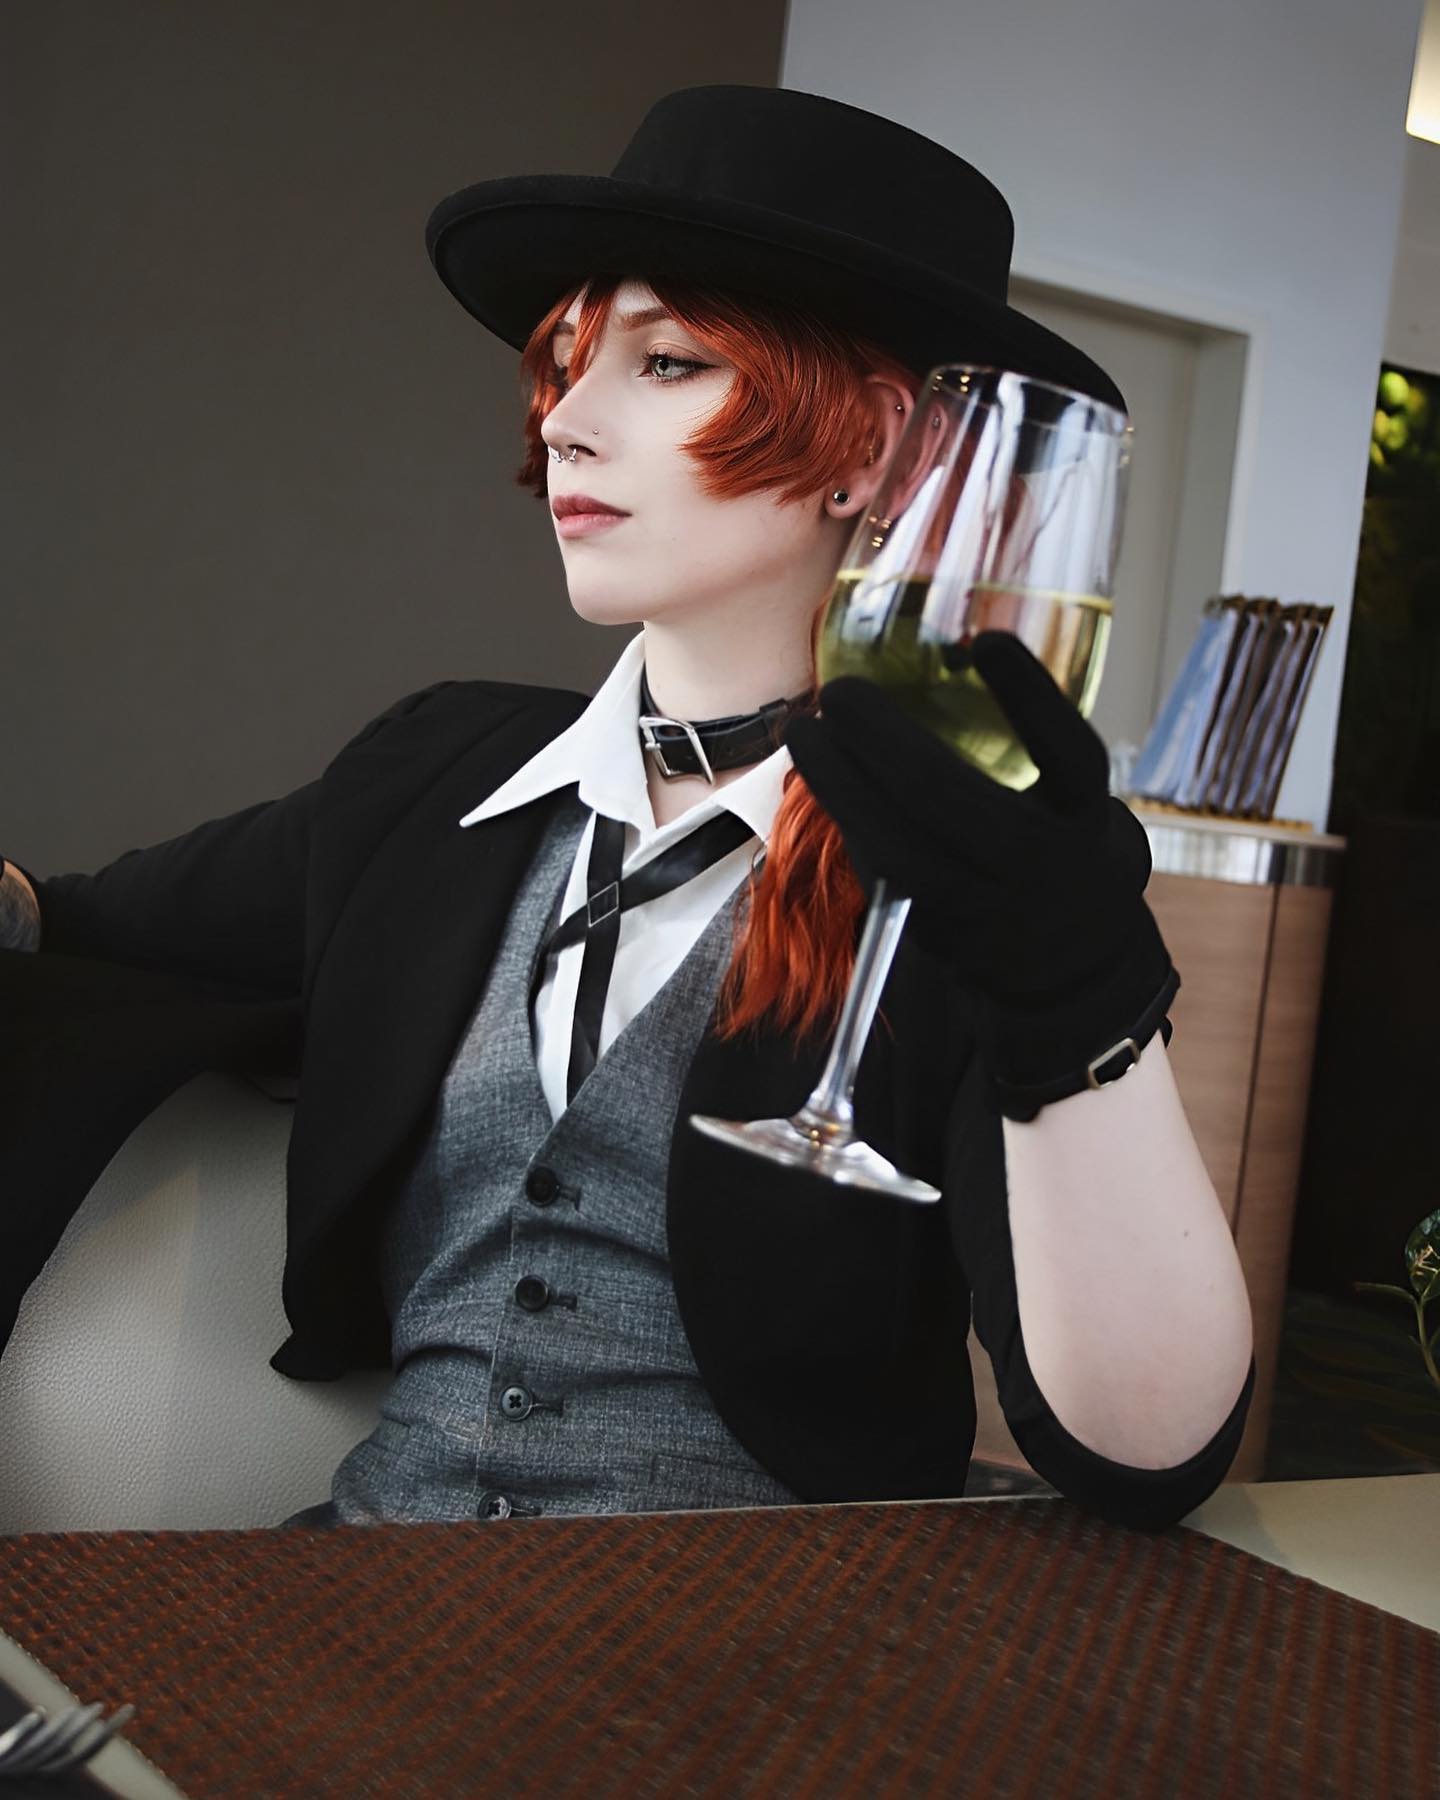 “..I was going easy on you”🍷
~
don’t come at me for not using red wine i’m a dazai kinnie not a chuuya kinnie and i hate red wine 🤣 cosplaying chuuya instead of dazai felt so strange hahah its definitely not for me but it was fun, some photos from @megaconlive 
~
⛓cosplayer: @riotwolf.cos 
❤️character: chuuya nakahara
⛓anime: bungou stray dogs
📸 @hyper.cos @hypercos.photography 
~
~
~
#chuuya #chuuyanakahara #chuuyacosplay #chuuyanakaharacosplay #nakaharachuuya #bungoustraydogs #bungostraydogs #bungoustraydogscosplay #bsd #soukoku